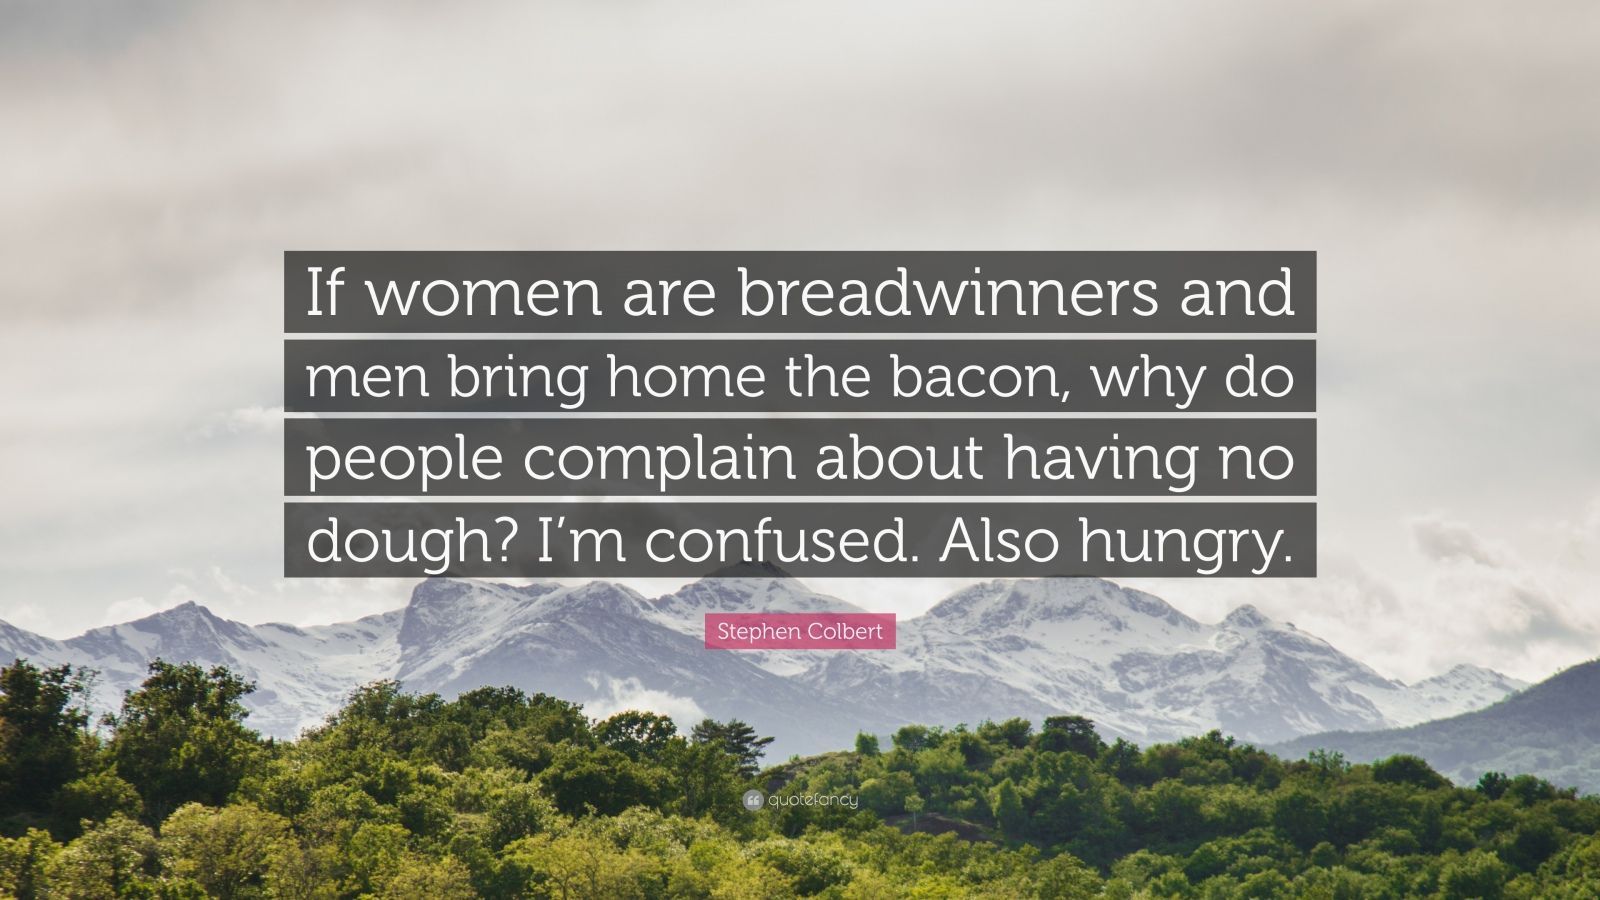 Stephen Colbert Quote: “If women are breadwinners and men bring